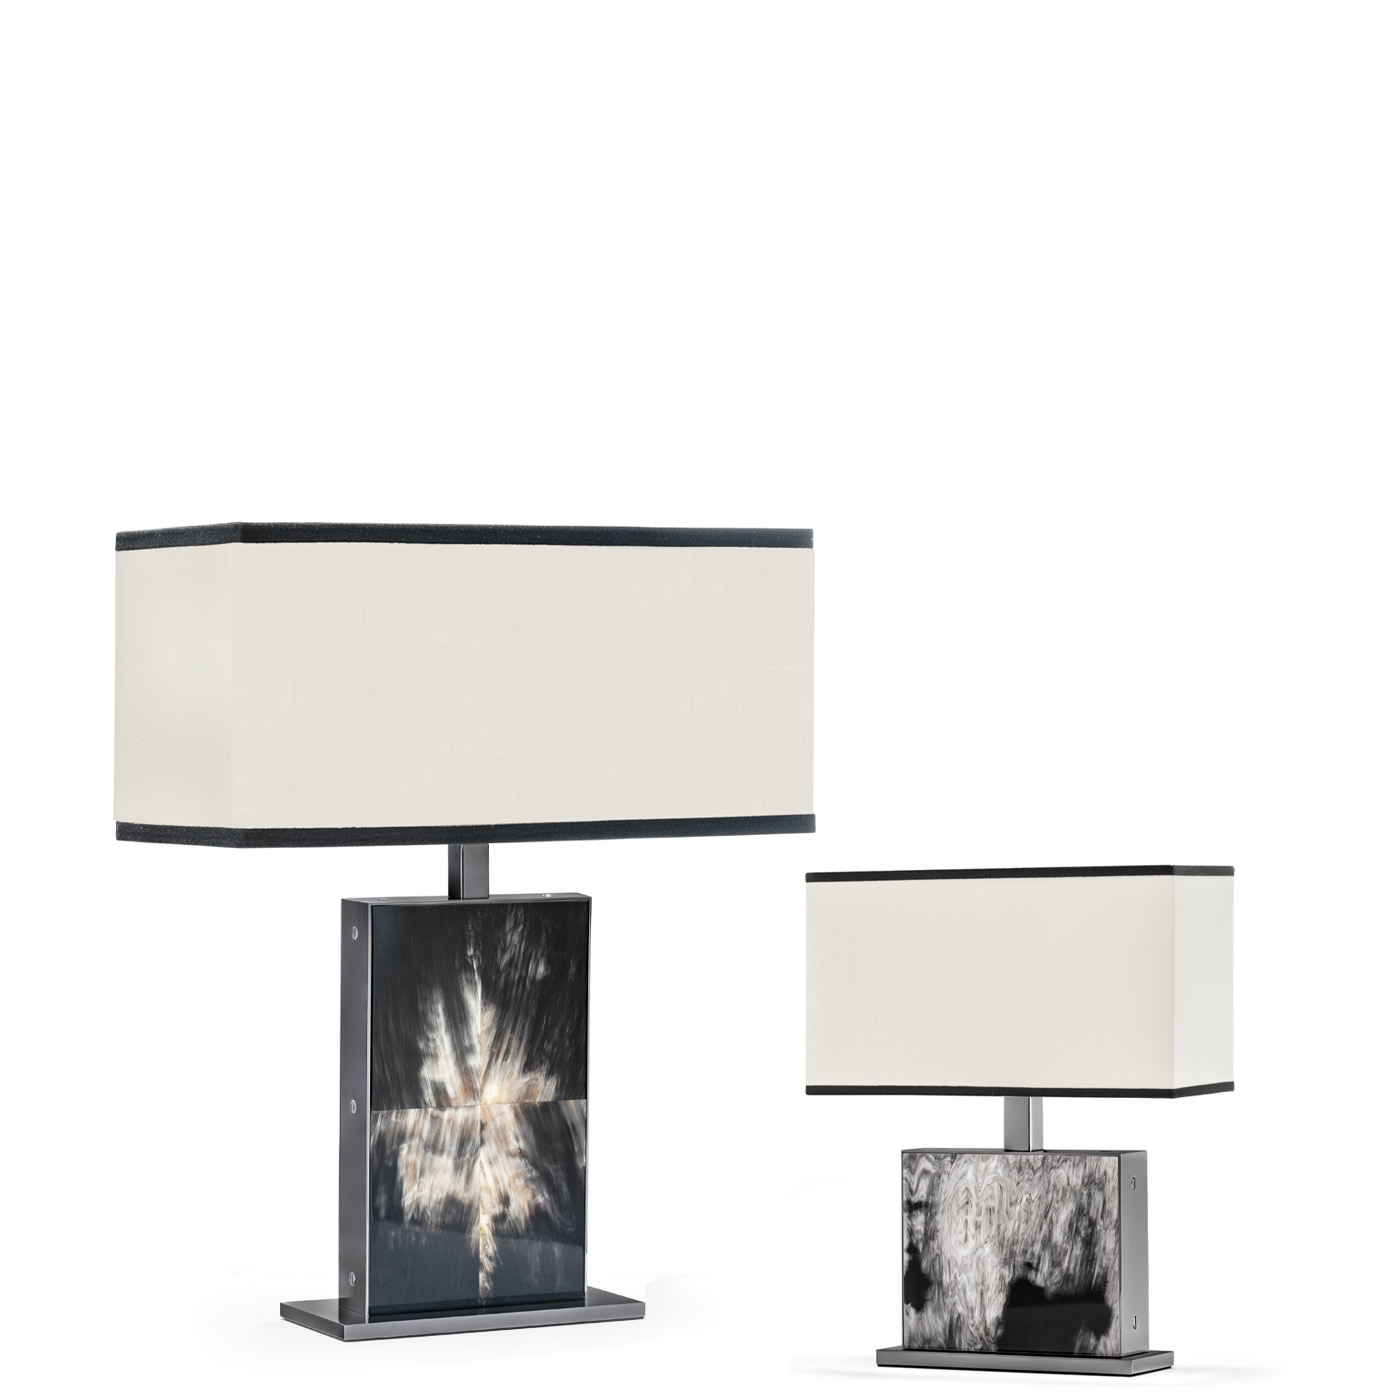 Lamps - Florian table lamps in horn and gunmetal brass - mod. 2315, 2317 - Arcahorn